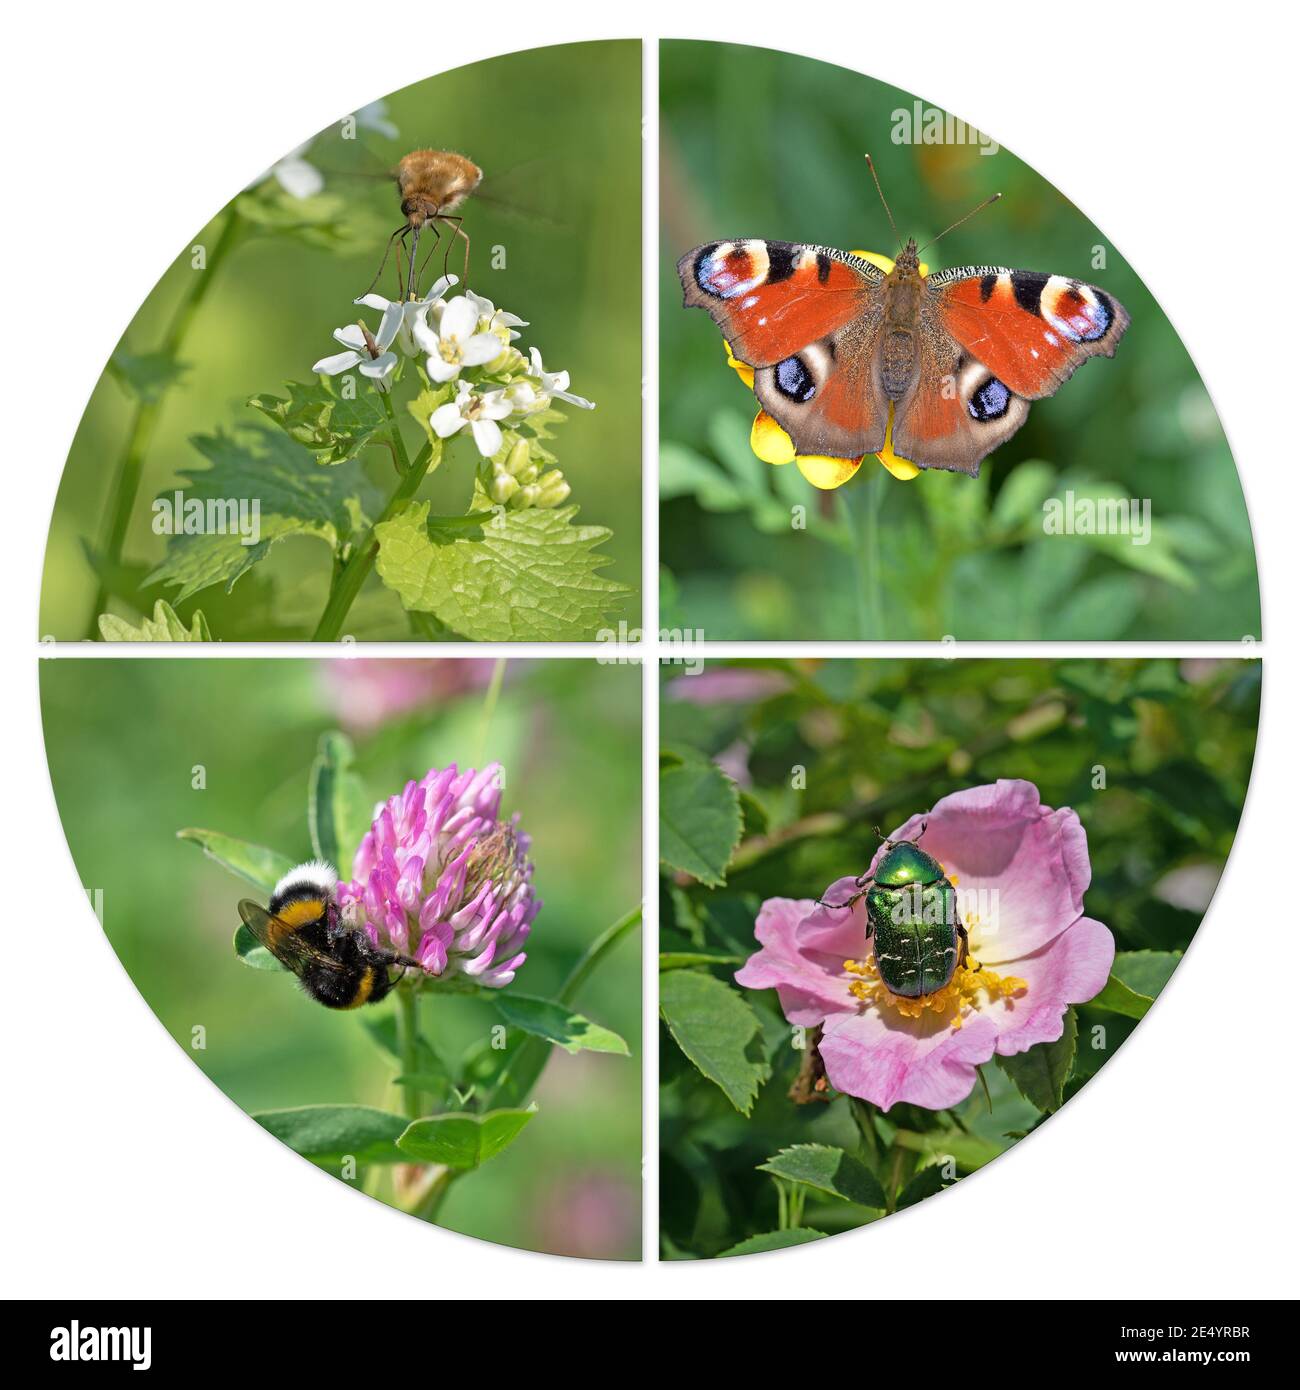 Different insects in a collage Stock Photo